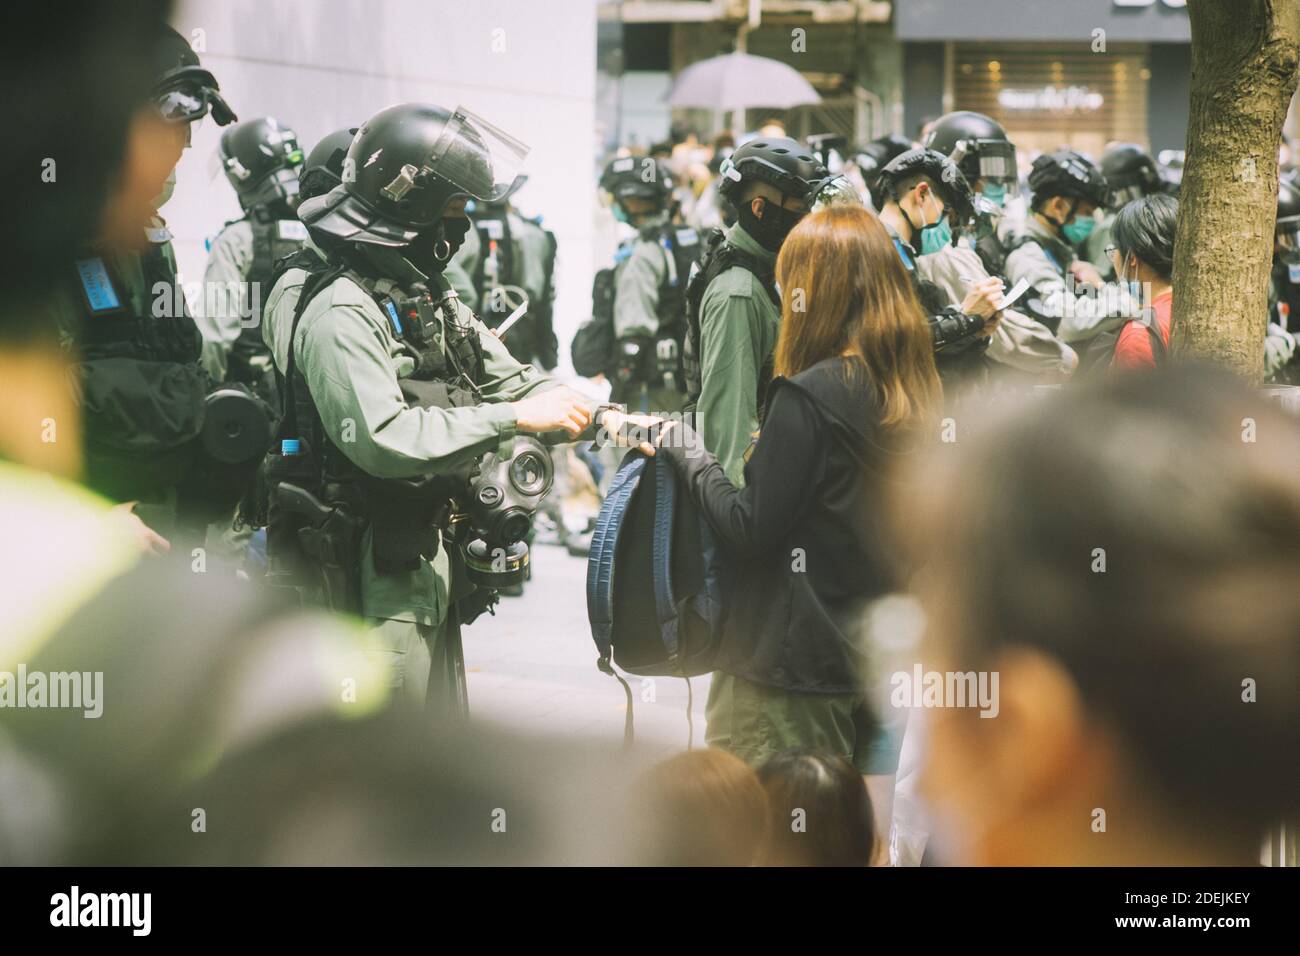 Hong Kong, 27 May 2020, protesters are arrested by police as illegal assembly in Causeway Bay. People are wearing mask as covid 19 prevention control. Stock Photo